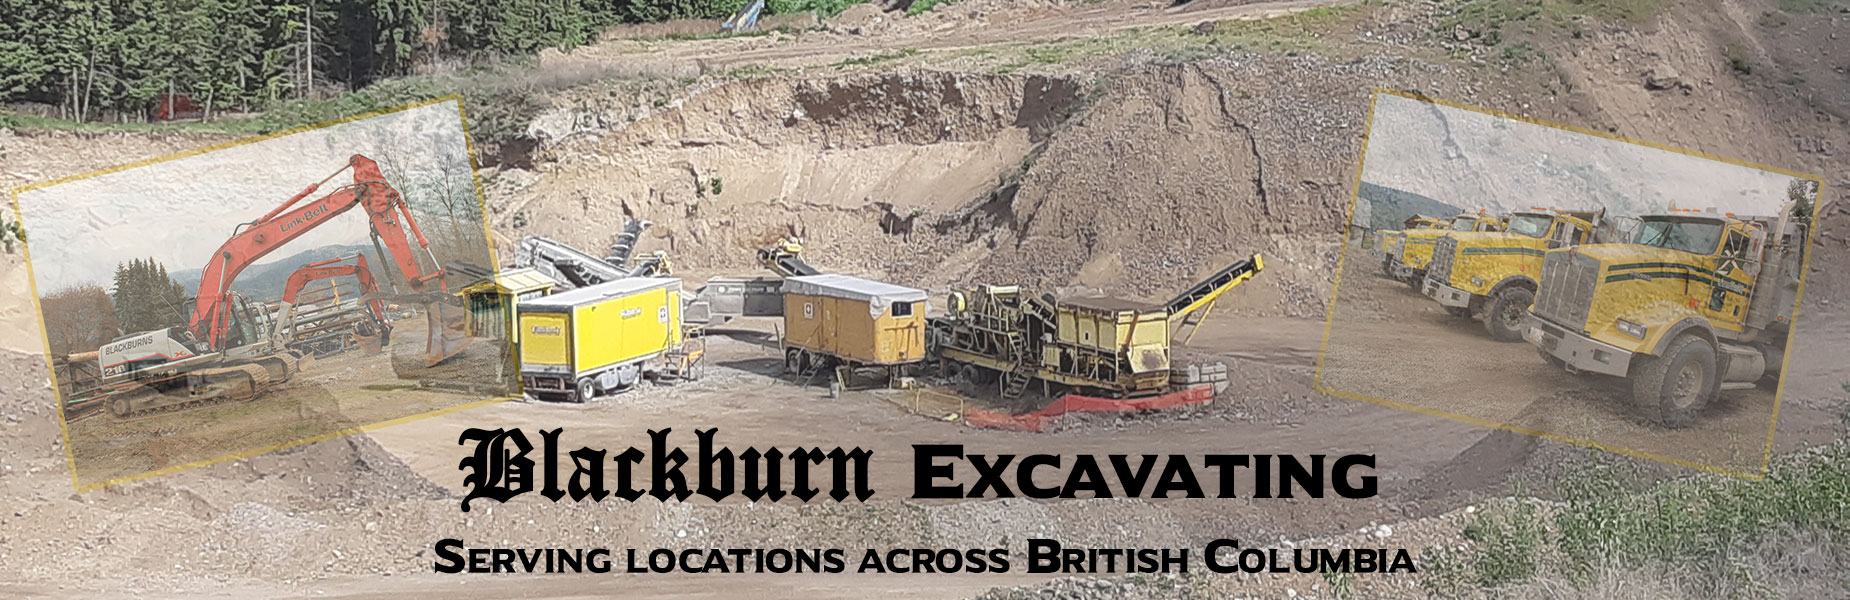 Blackburn Excavating is here for you!